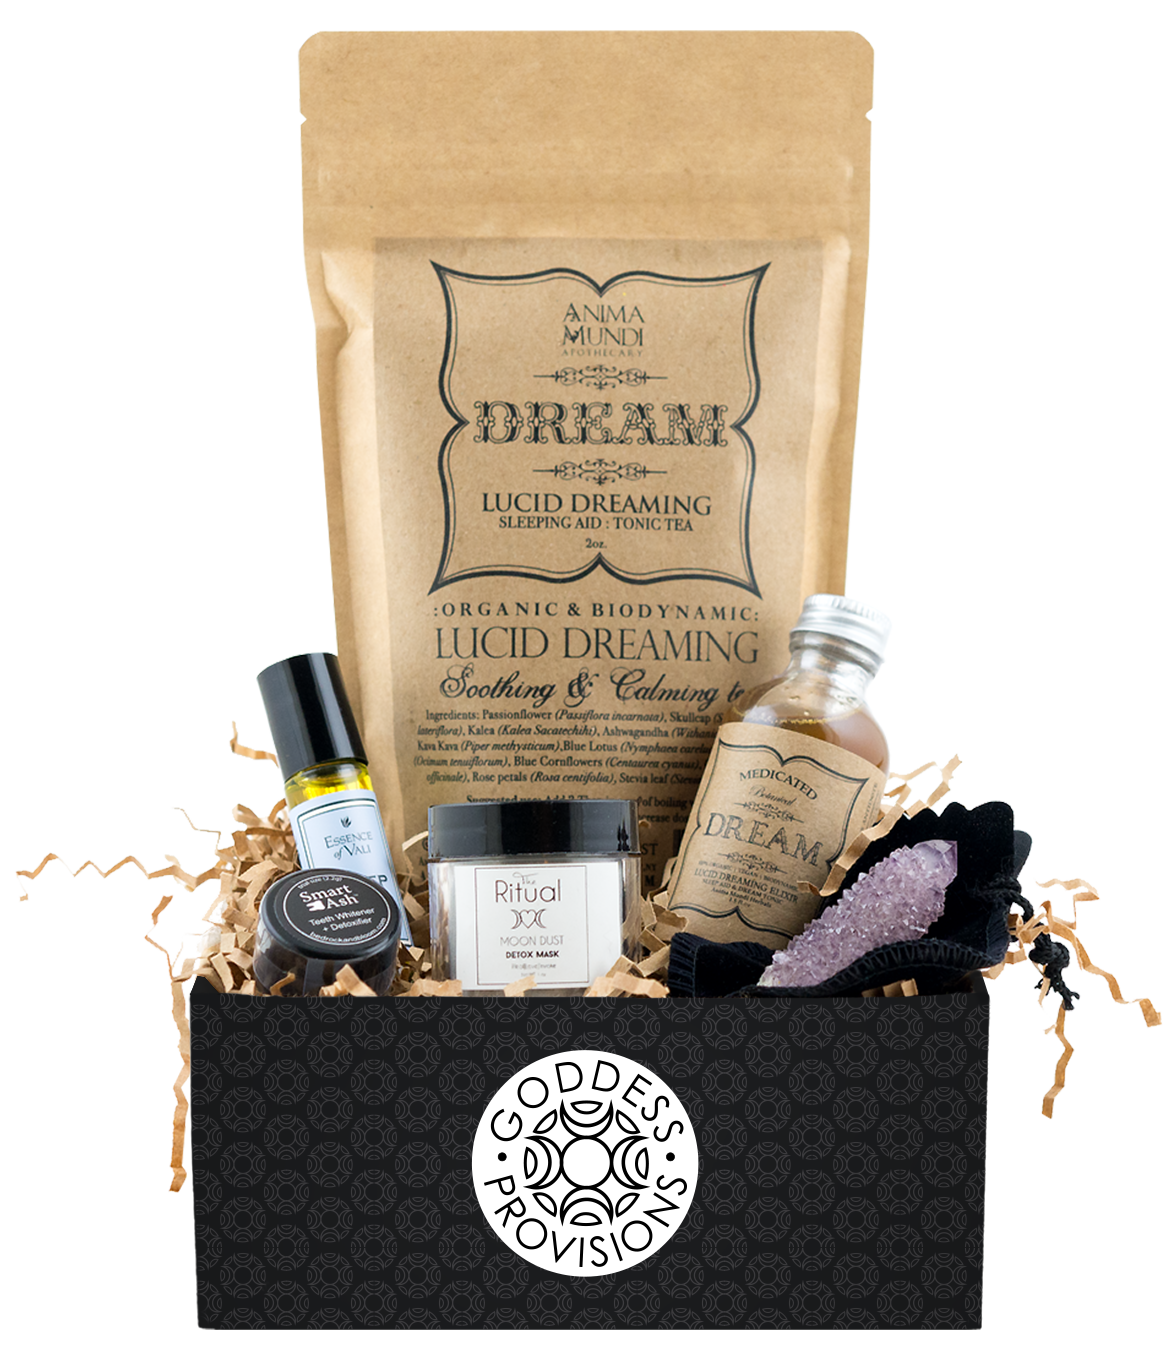  Awesome Subscription Boxes at Cratejoy